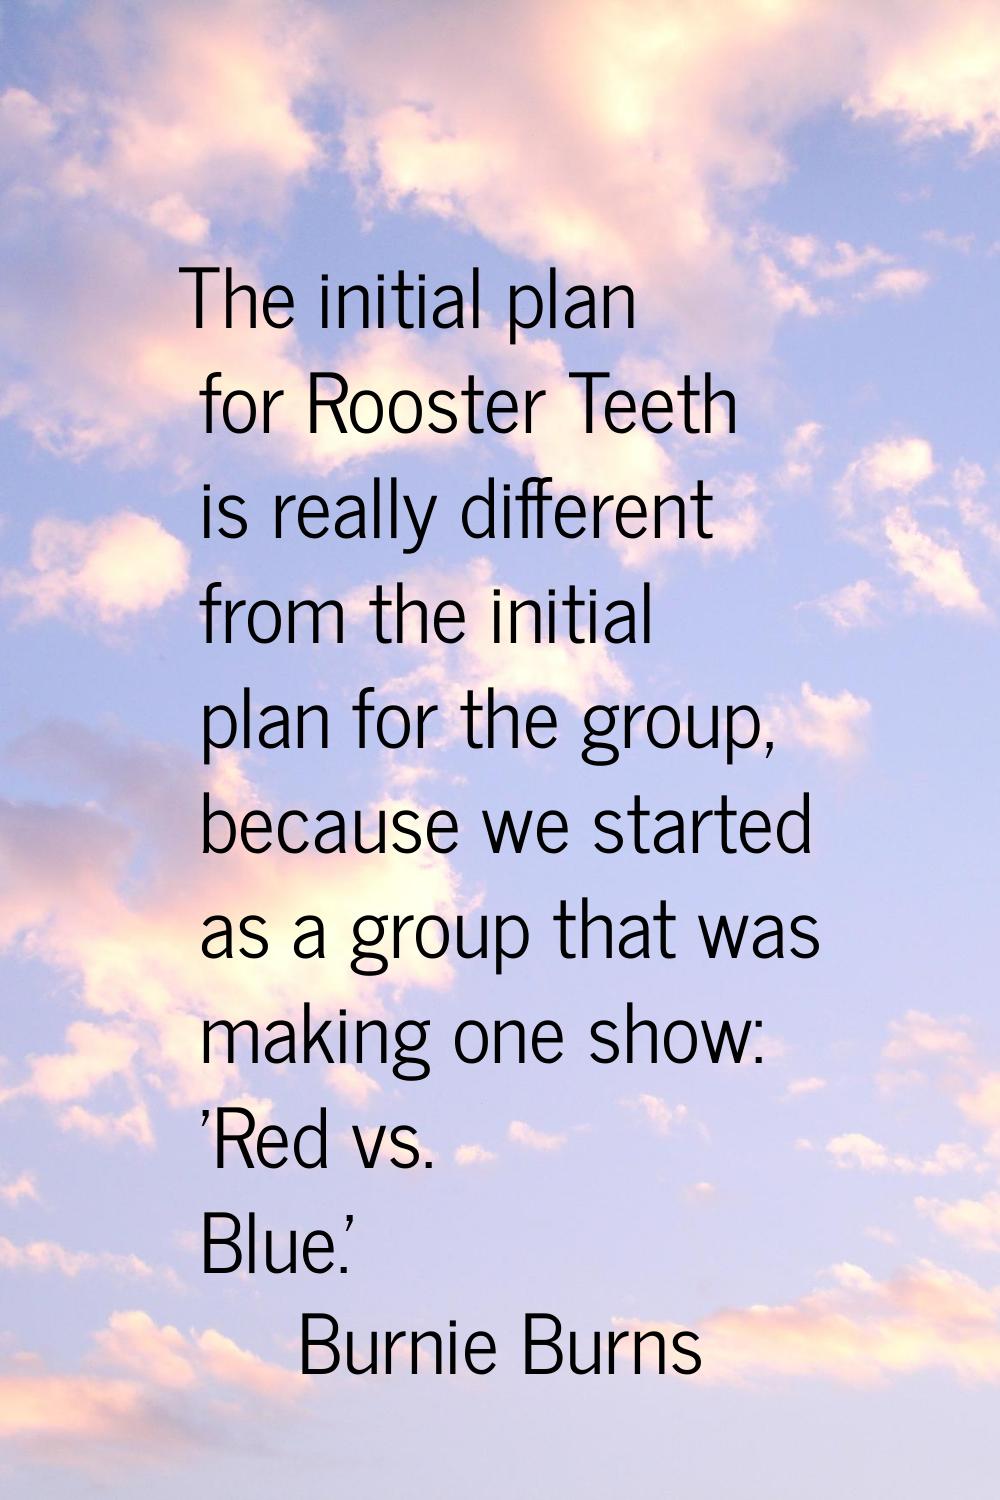 The initial plan for Rooster Teeth is really different from the initial plan for the group, because